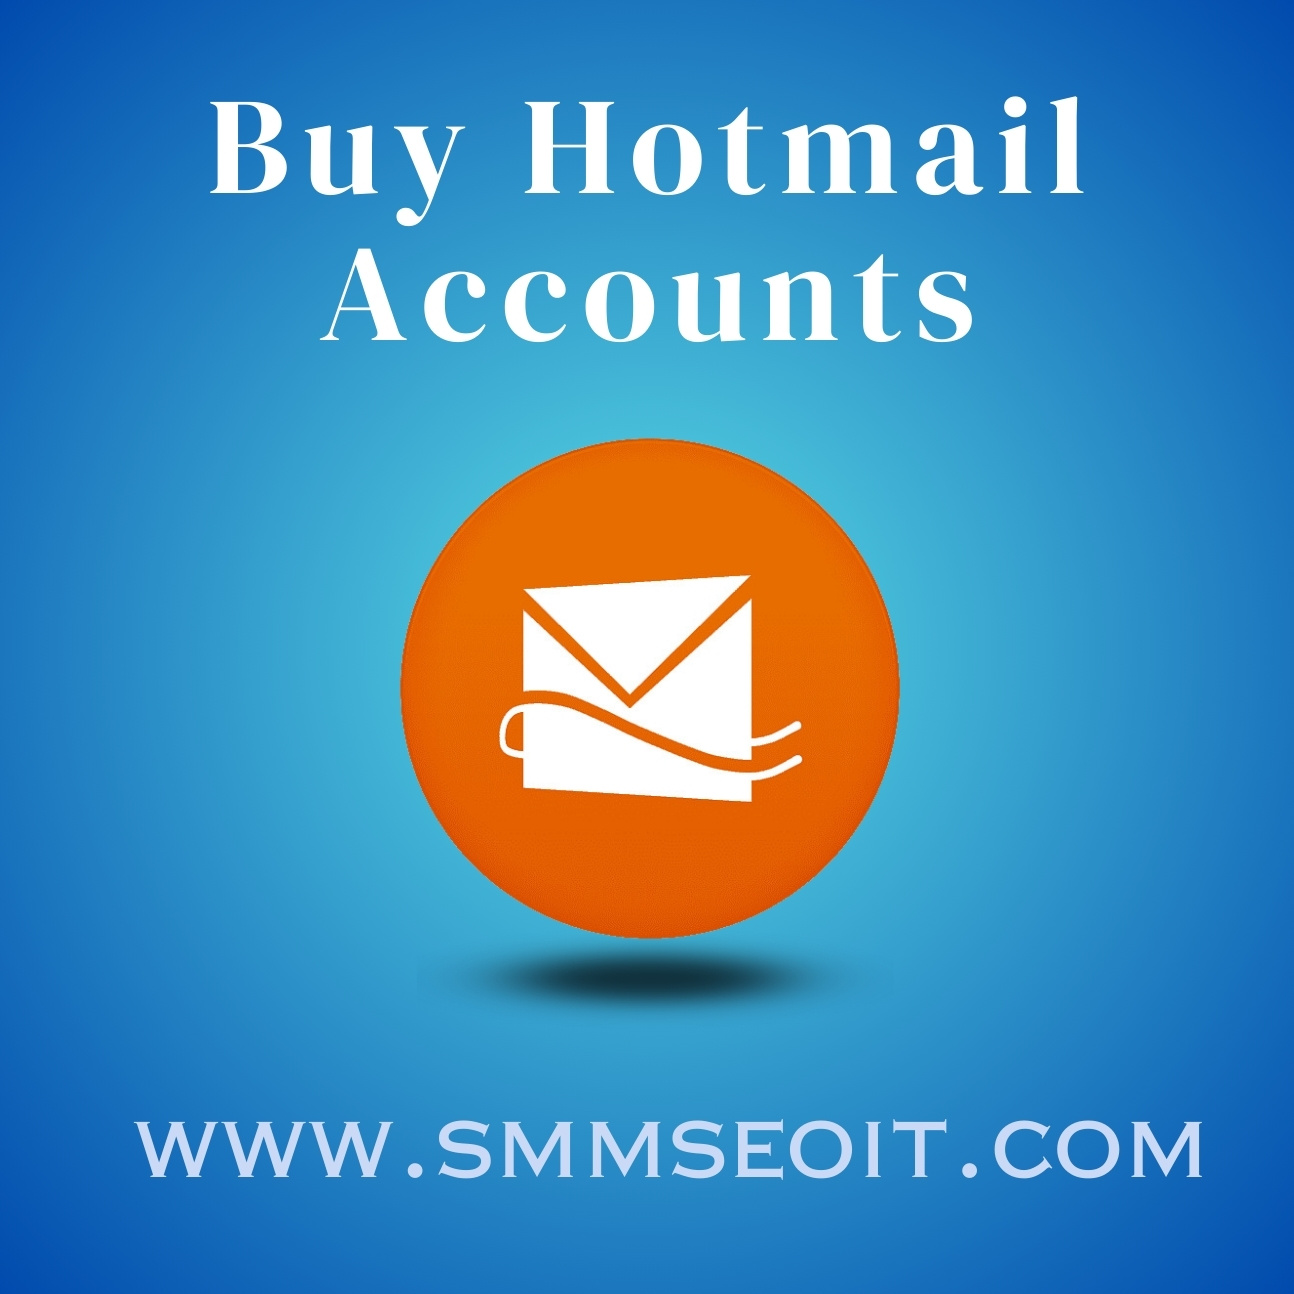 Buy Hotmail Accounts - Verified, Secure, and Reliable